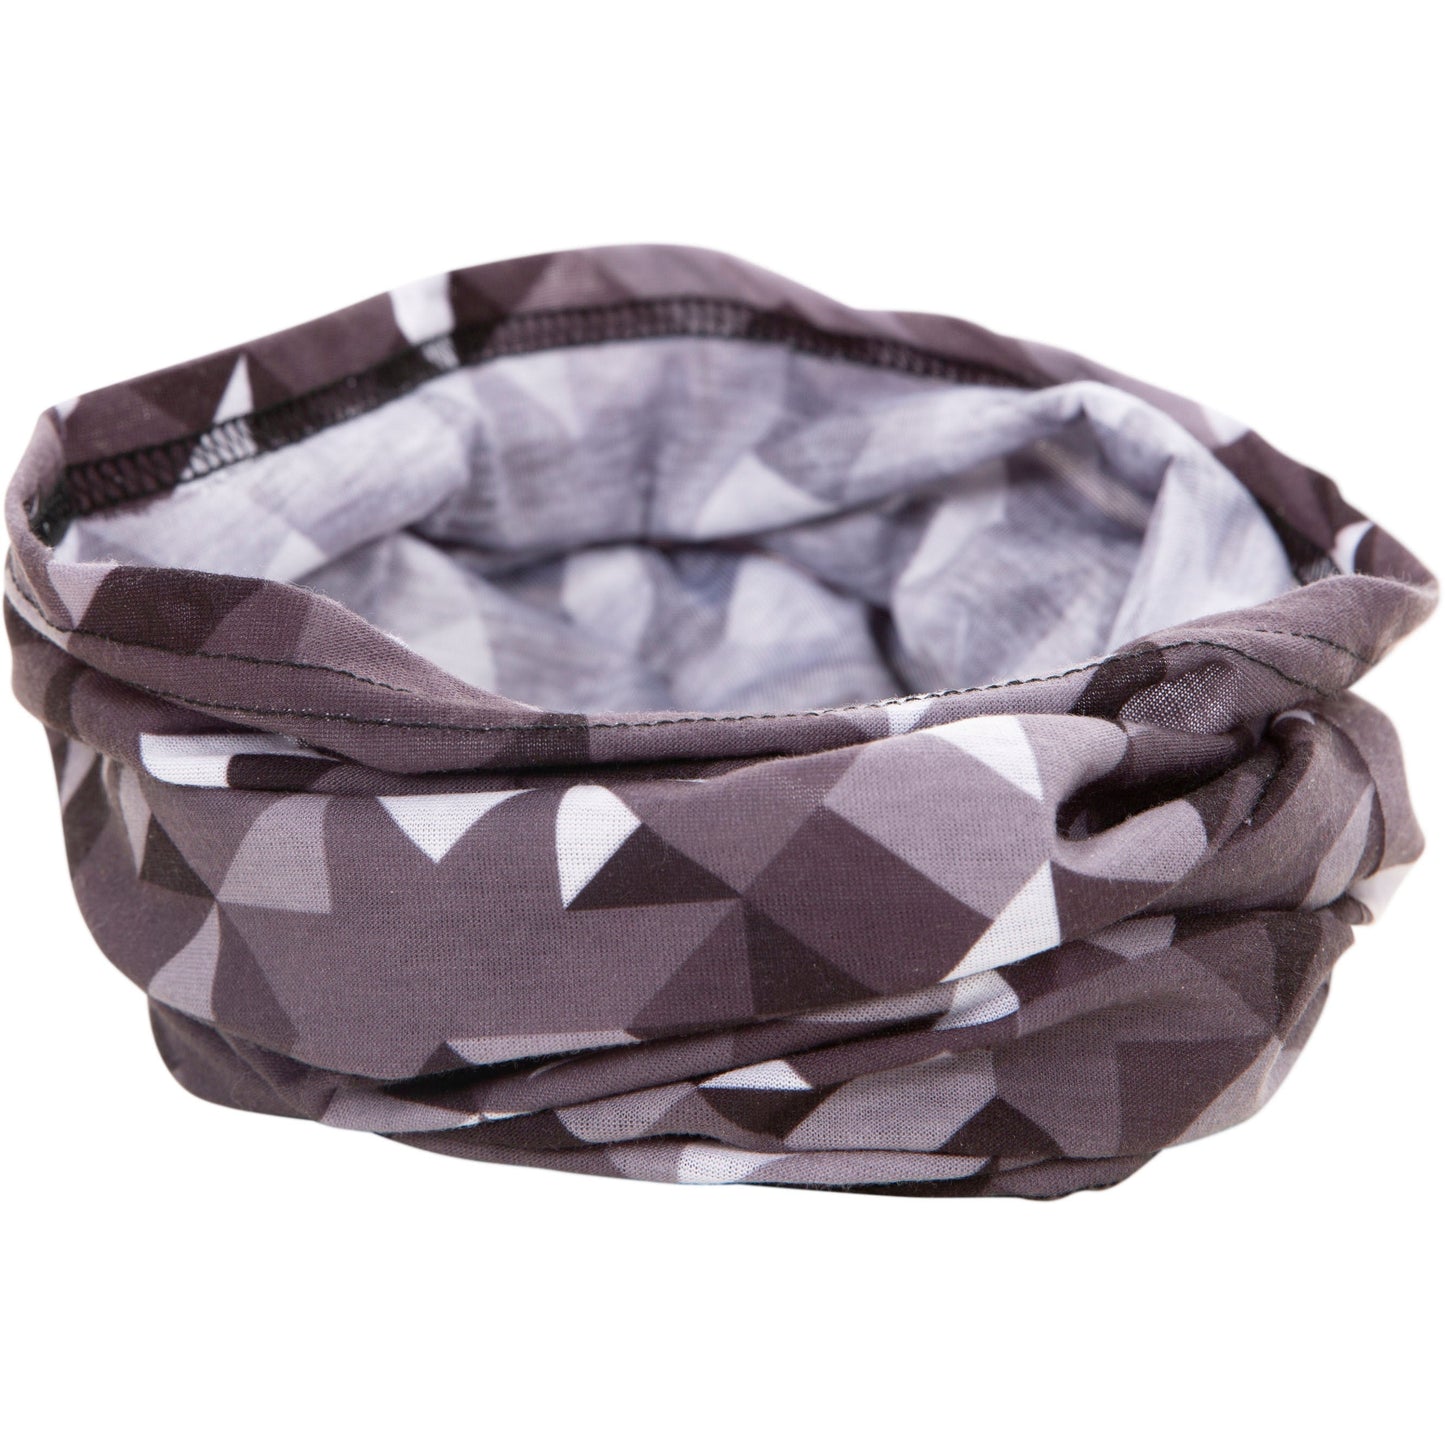 Busby Adults Neck Warmer / Face Covering in Shard Geo Print